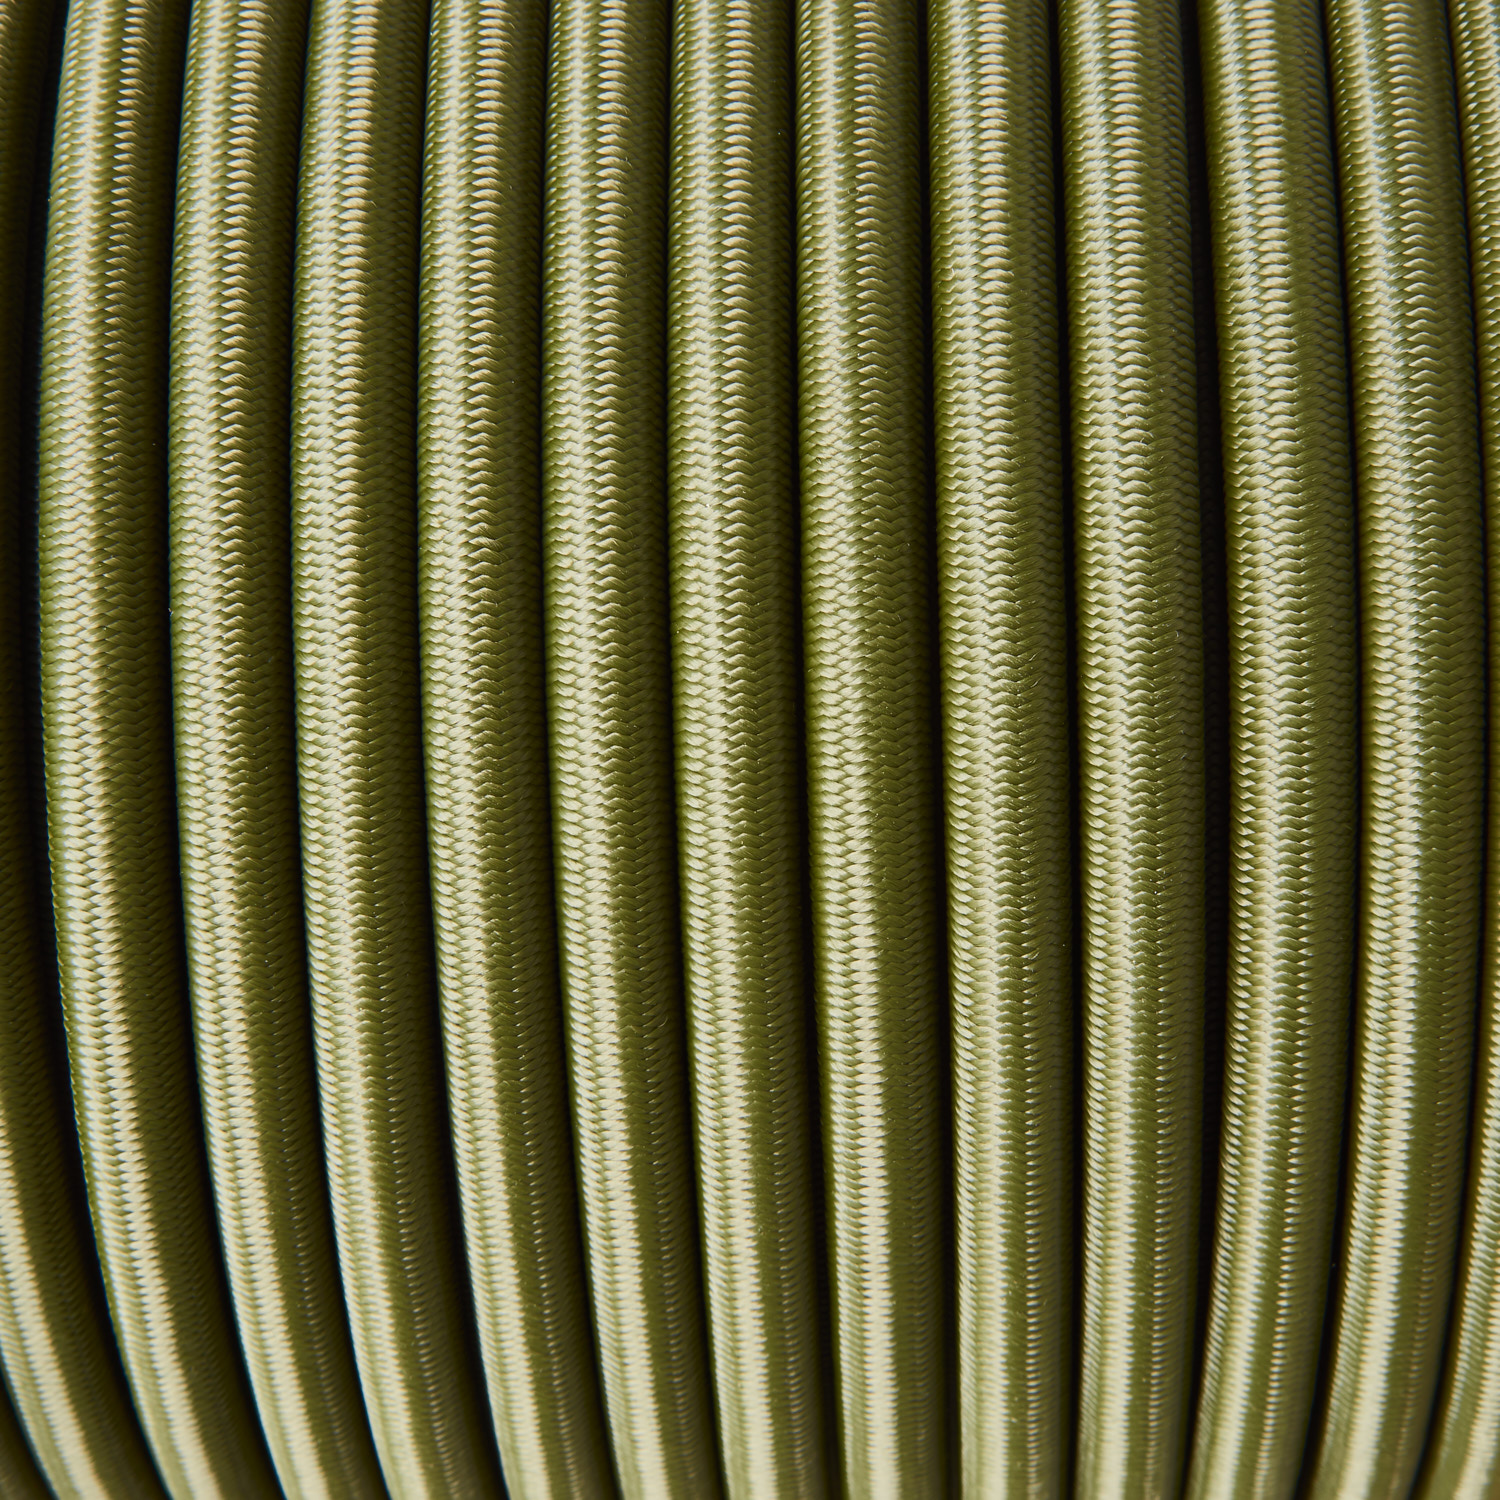 10mm Round Elastic Bungee Shock Cord Khaki Detail Strong Durable Stretch Rope Polypropylene Rubber Leicester UK Made